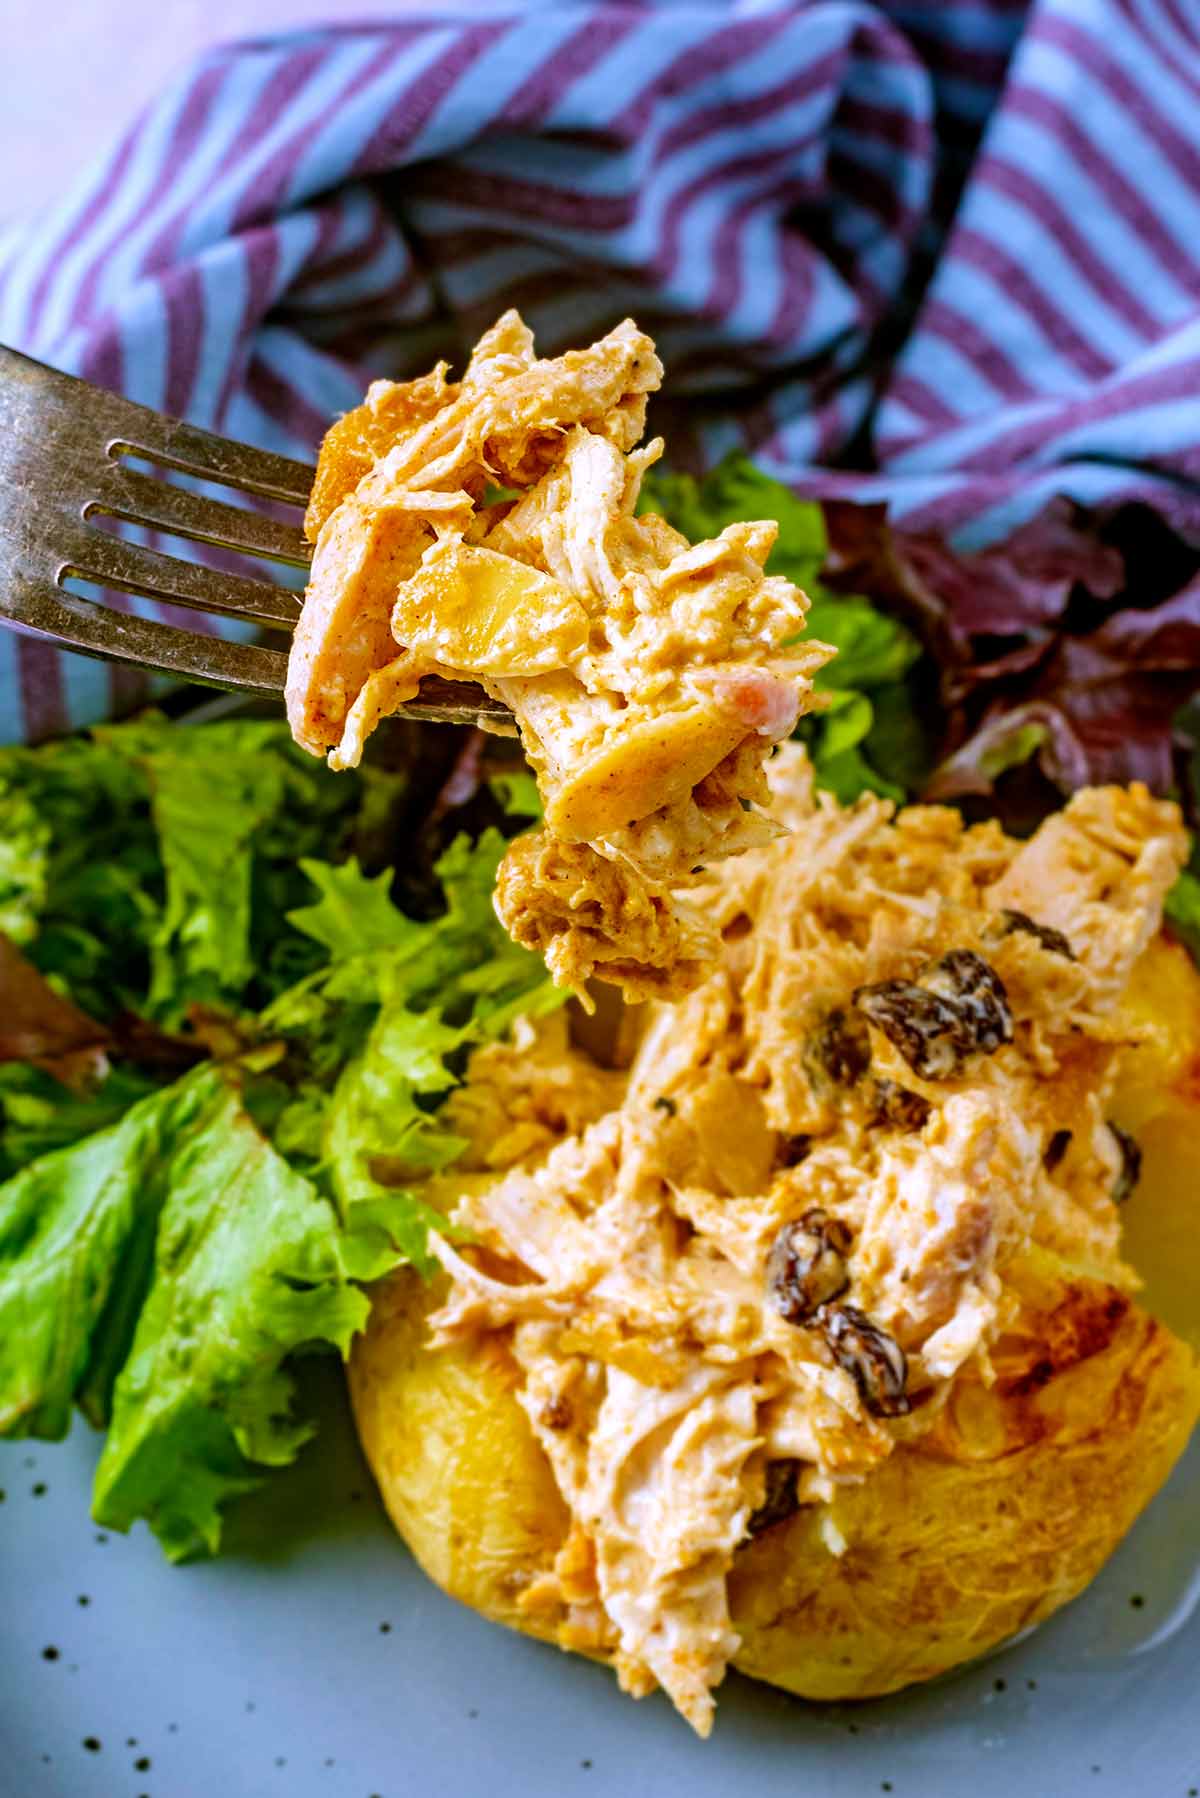 A fork picking come coronation chicken up from the top of a baked potato.